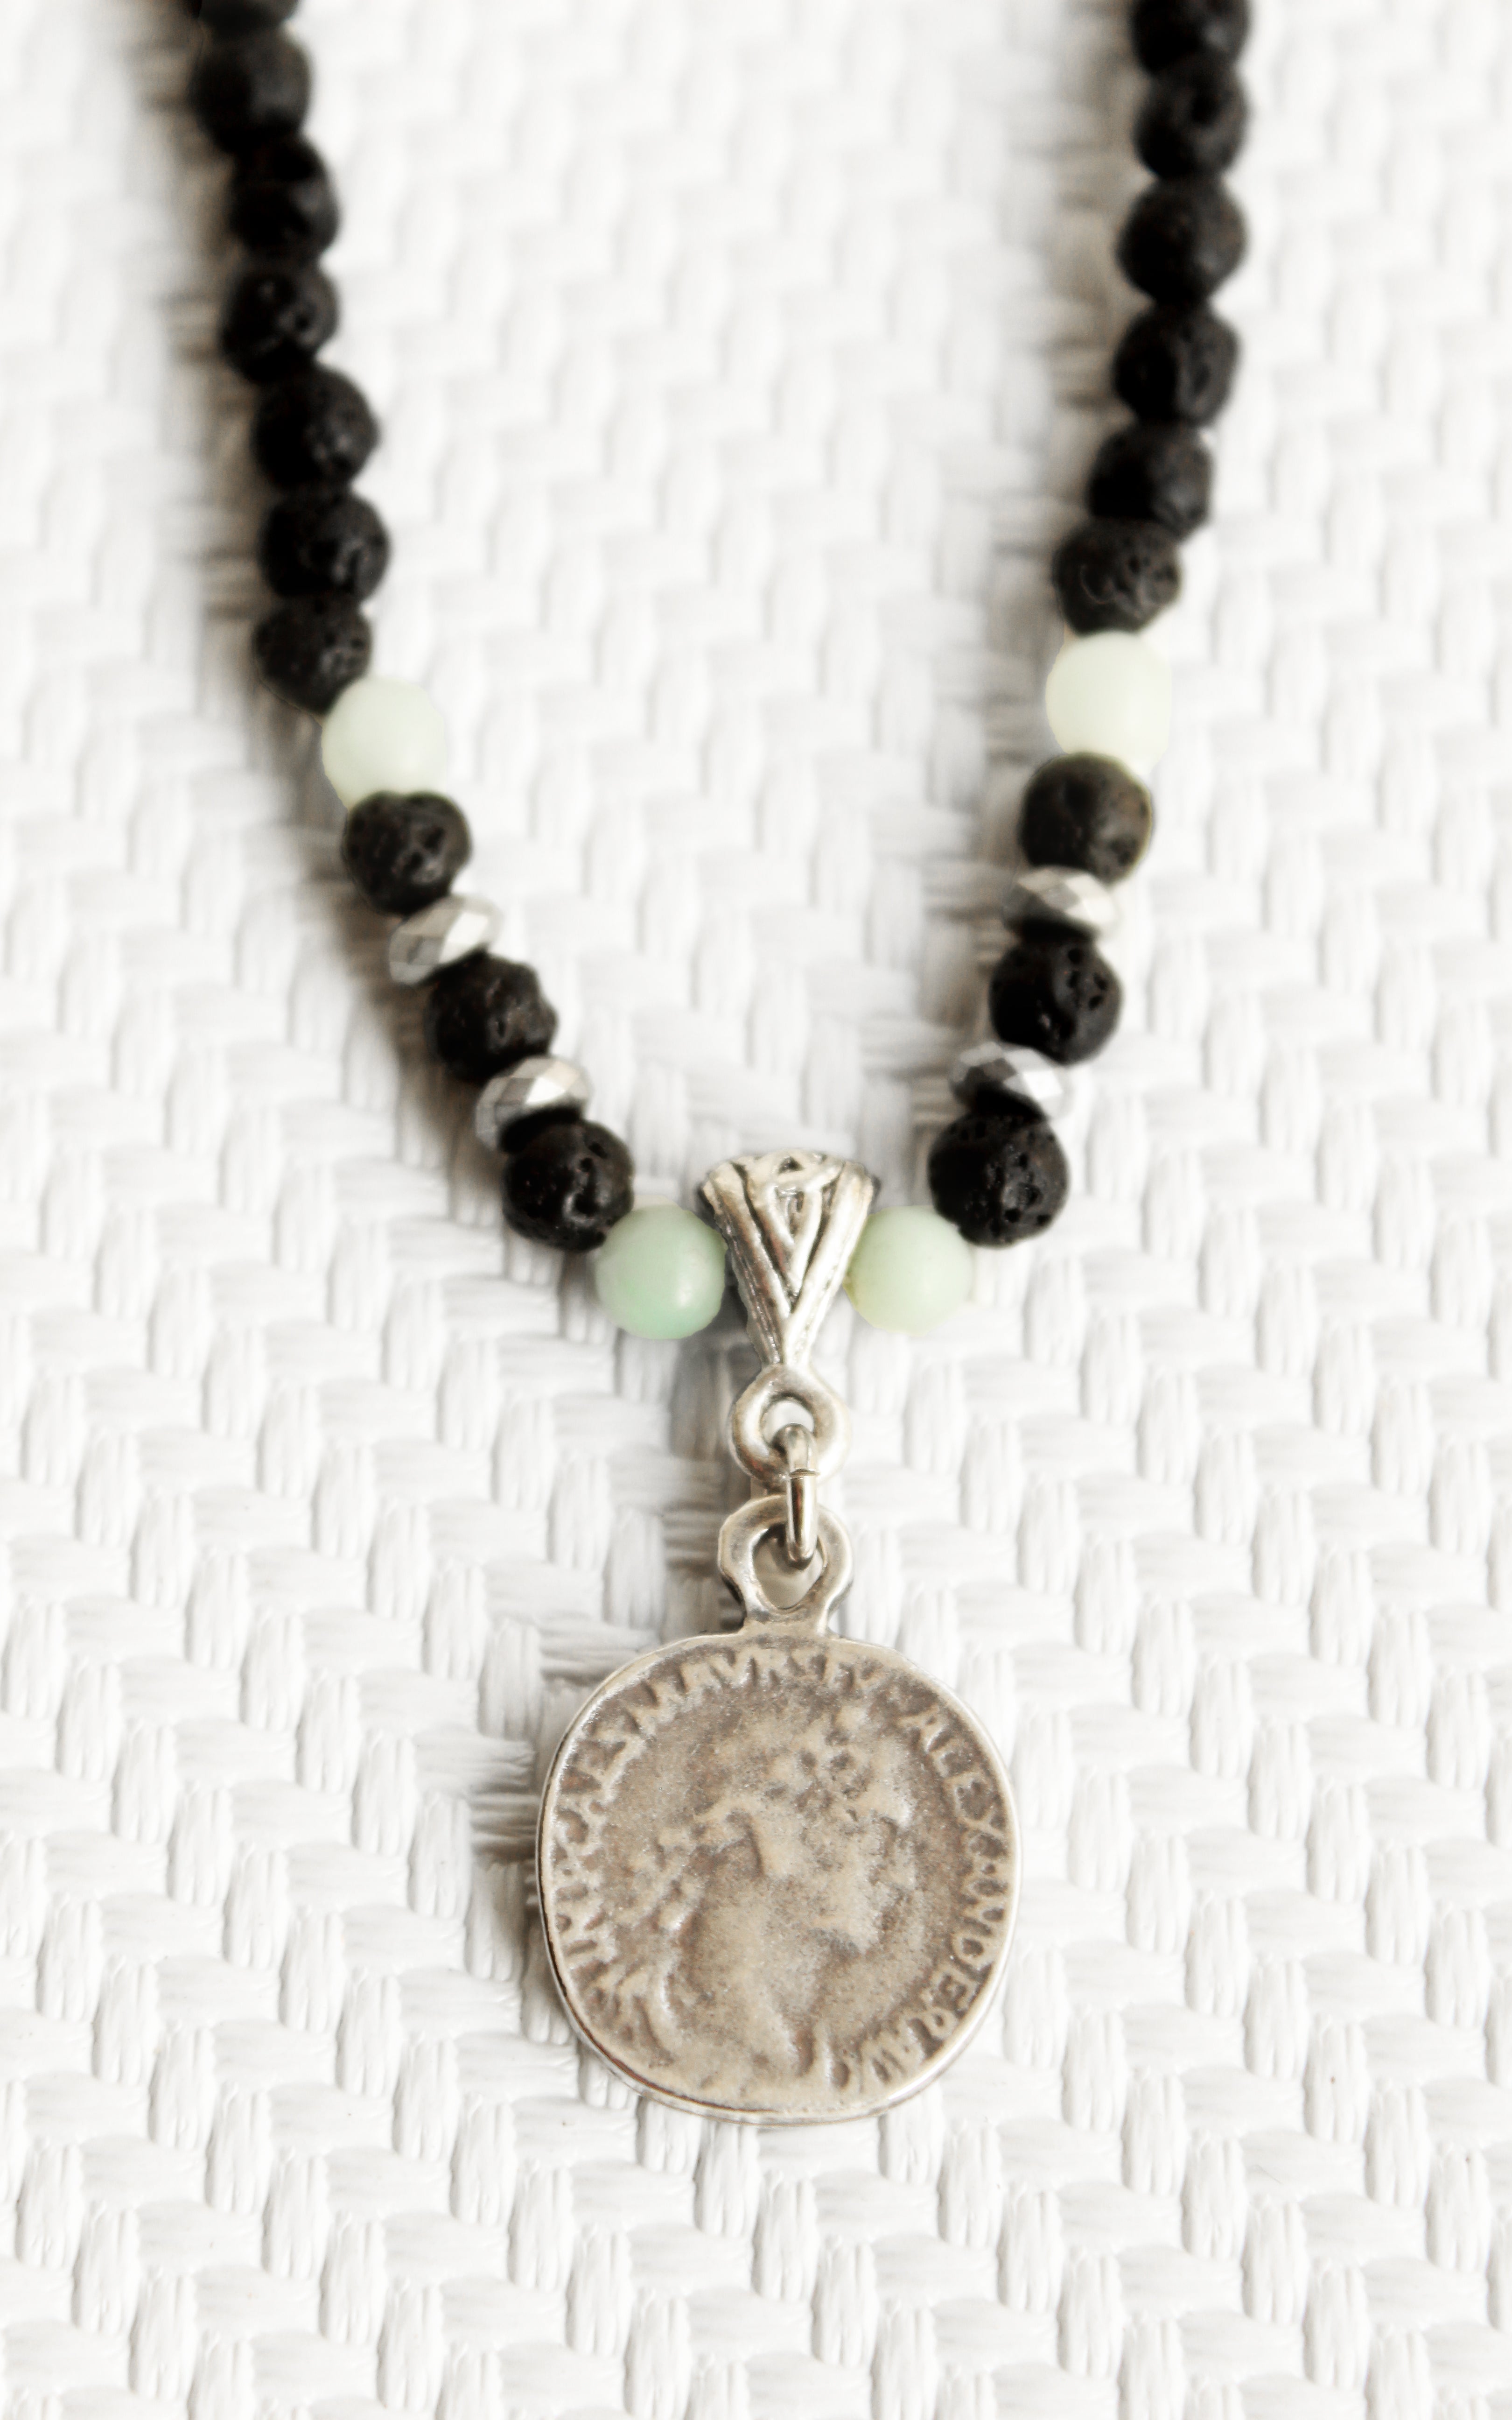 ORGADA necklace made of black lava beads and a replica coin photographed in close-up